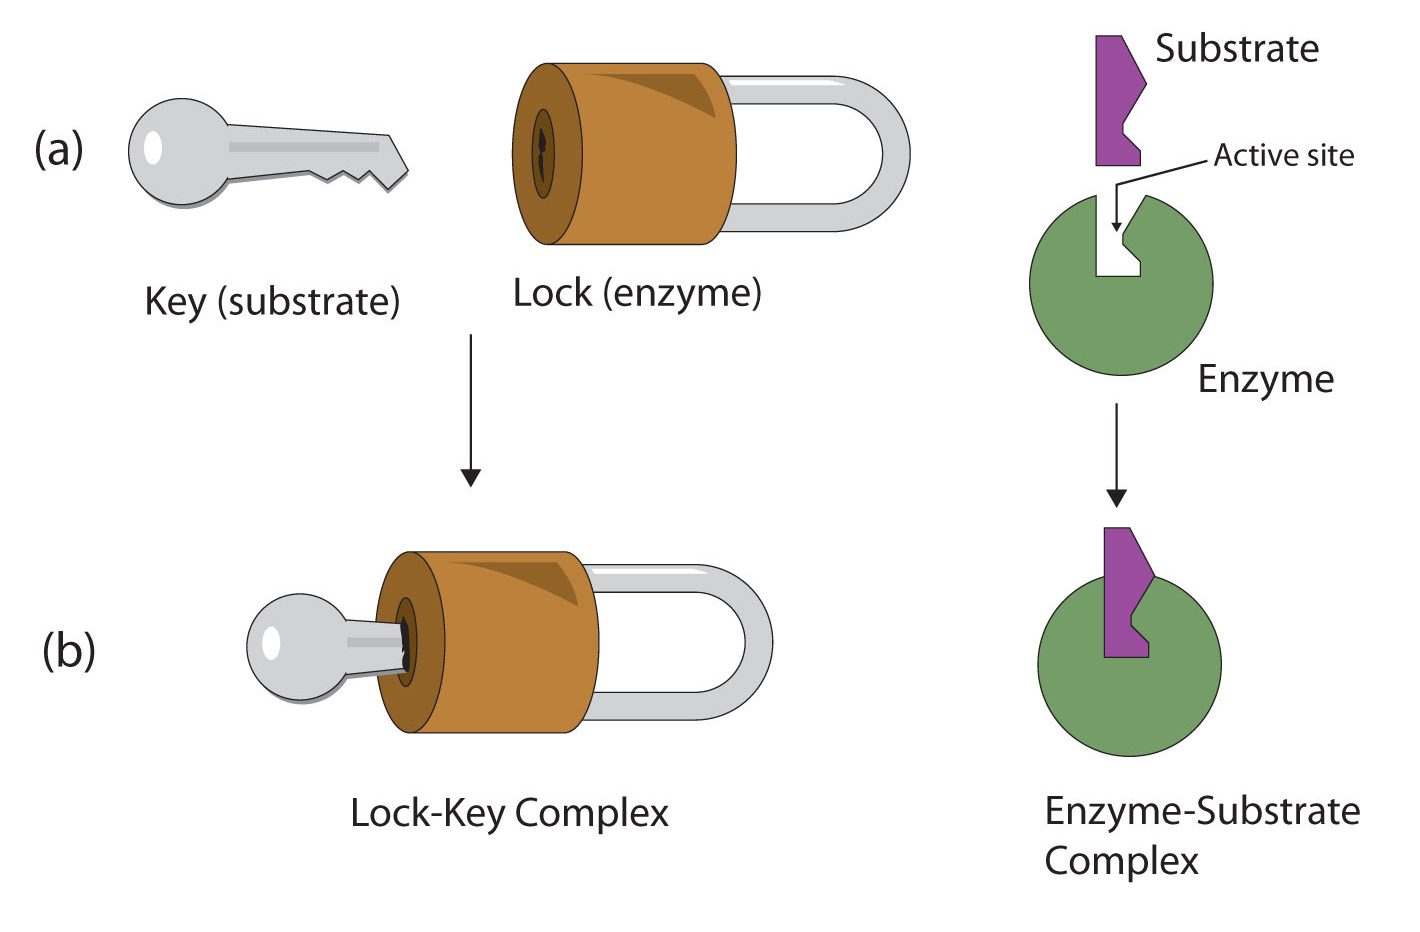 The lock and key model of enzyme action